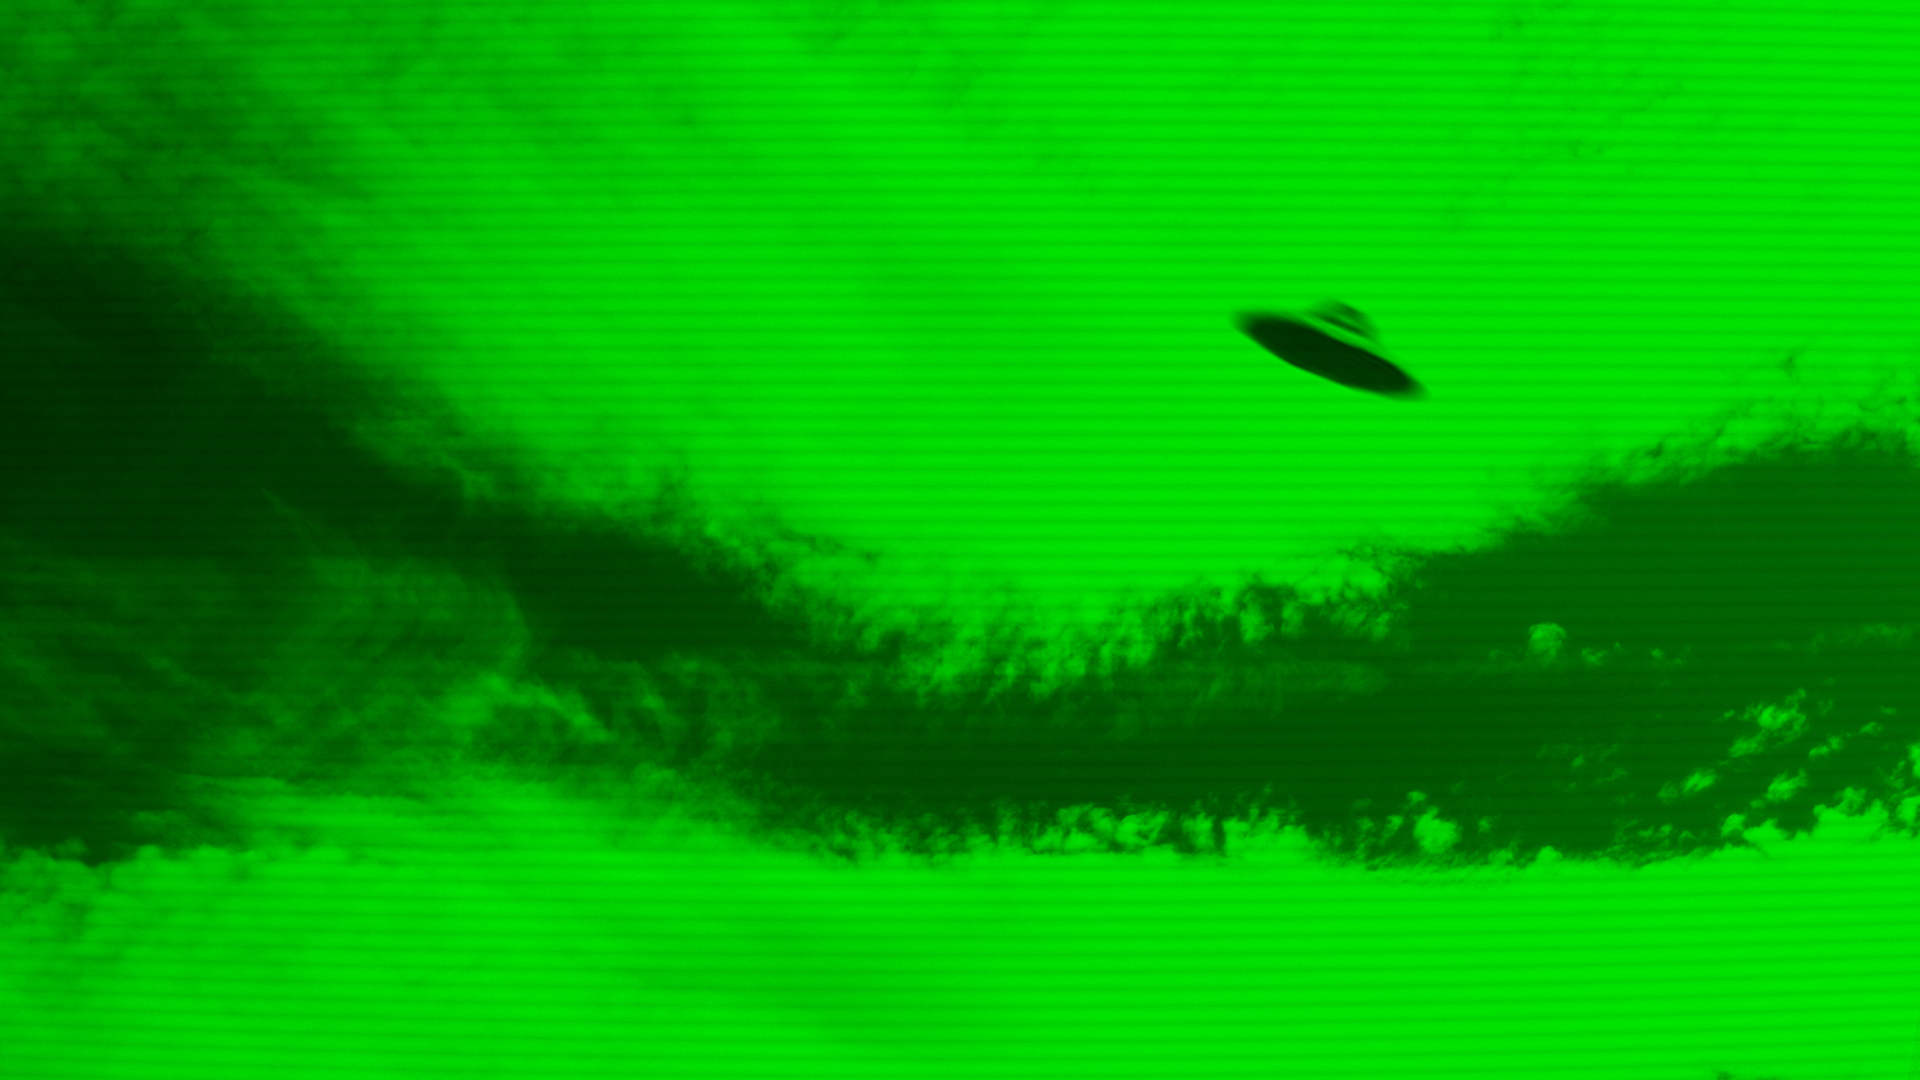 An image showing a UFO was allegedly captured on closed circuit television (CCTV) in the United Kingdom in 2008.